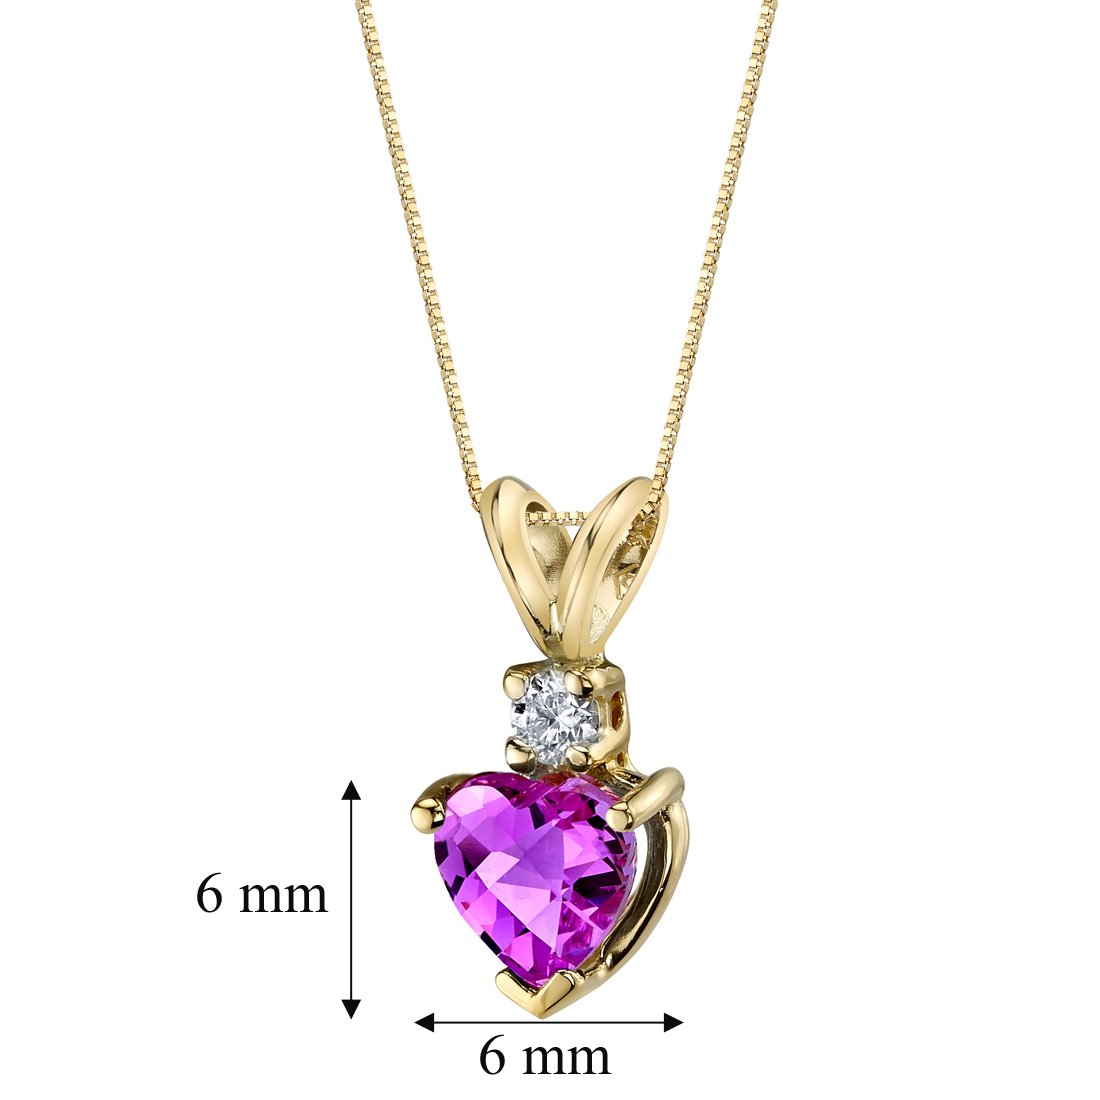 Peora Created Pink Sapphire with Genuine Diamond Pendant in 14 Karat Yellow Gold, Heart Shape Solitaire, 6mm, 1.15 Carats total